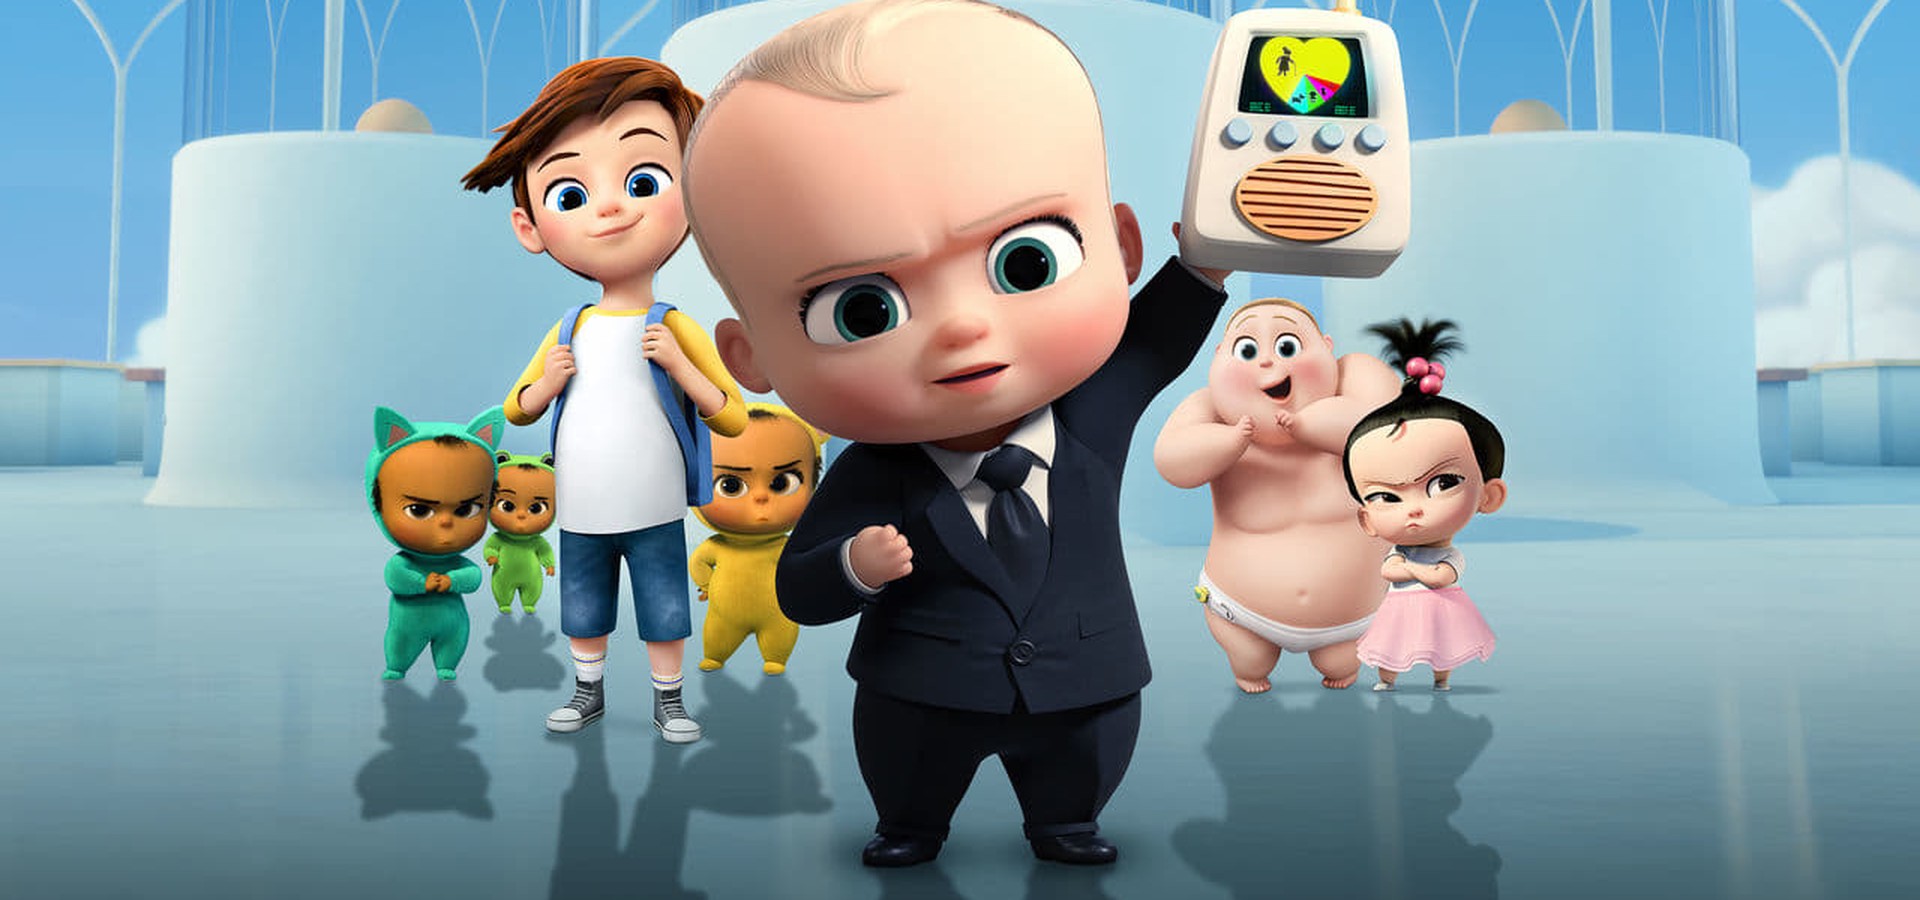 The Boss Baby: Back in Business 